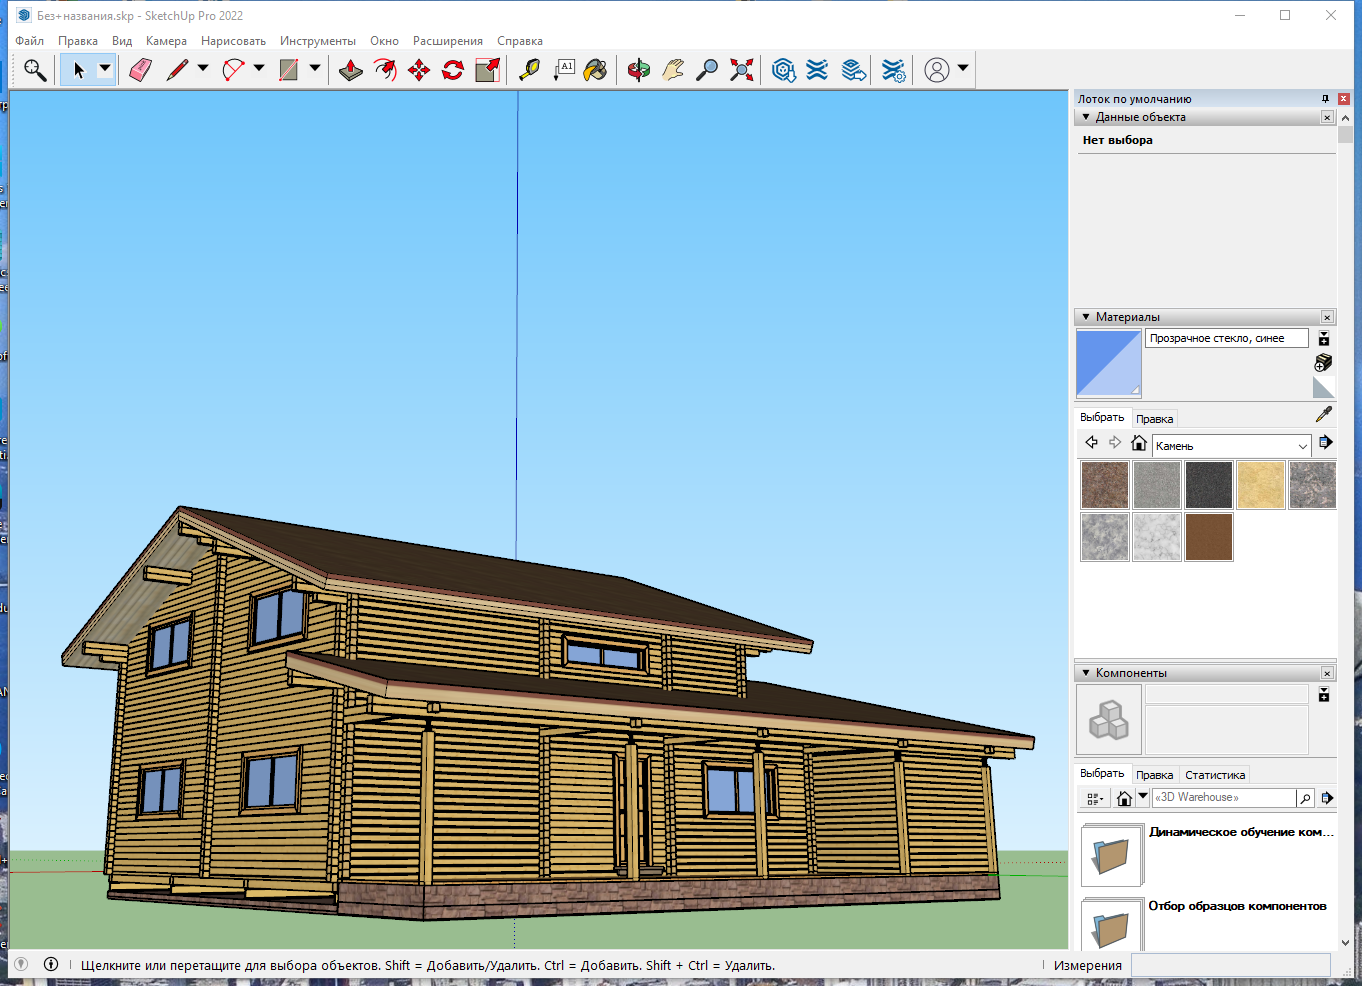 Working with SketchUp Pro 2022 v22.0.316